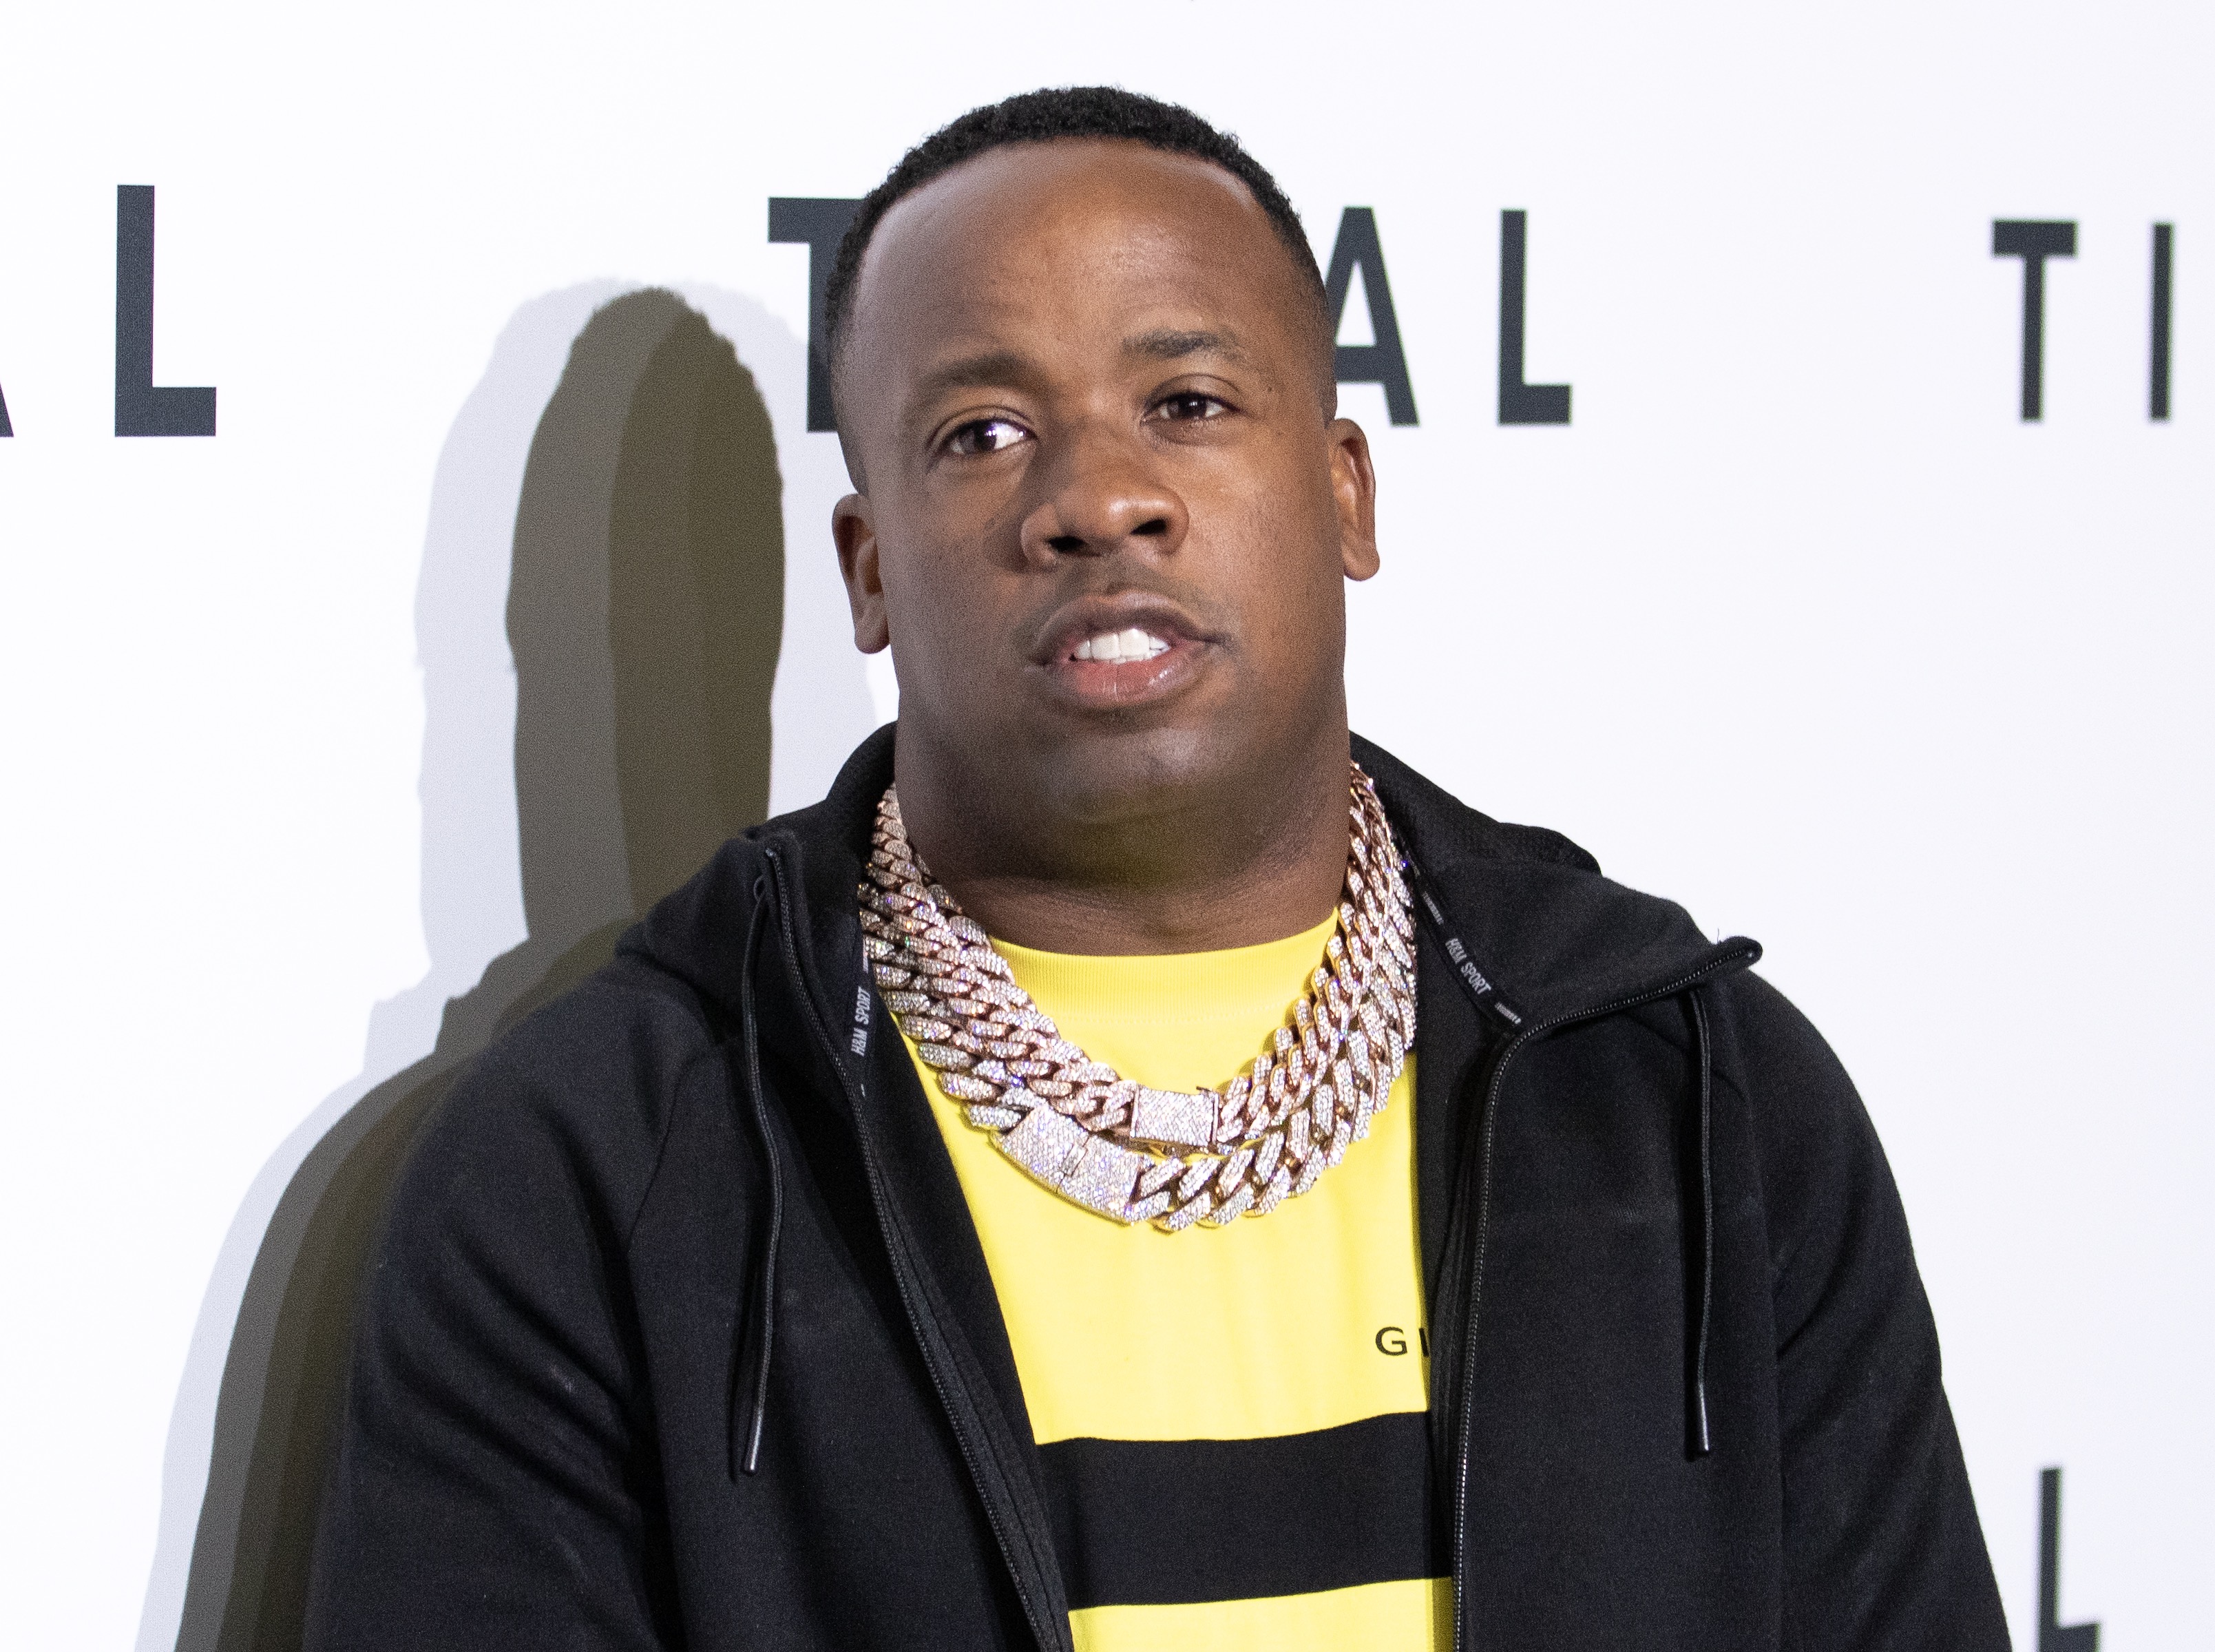 Yo Gotti & Team ROC Partner To Cover Funeral & Autopsy Costs For Parchman Inmate